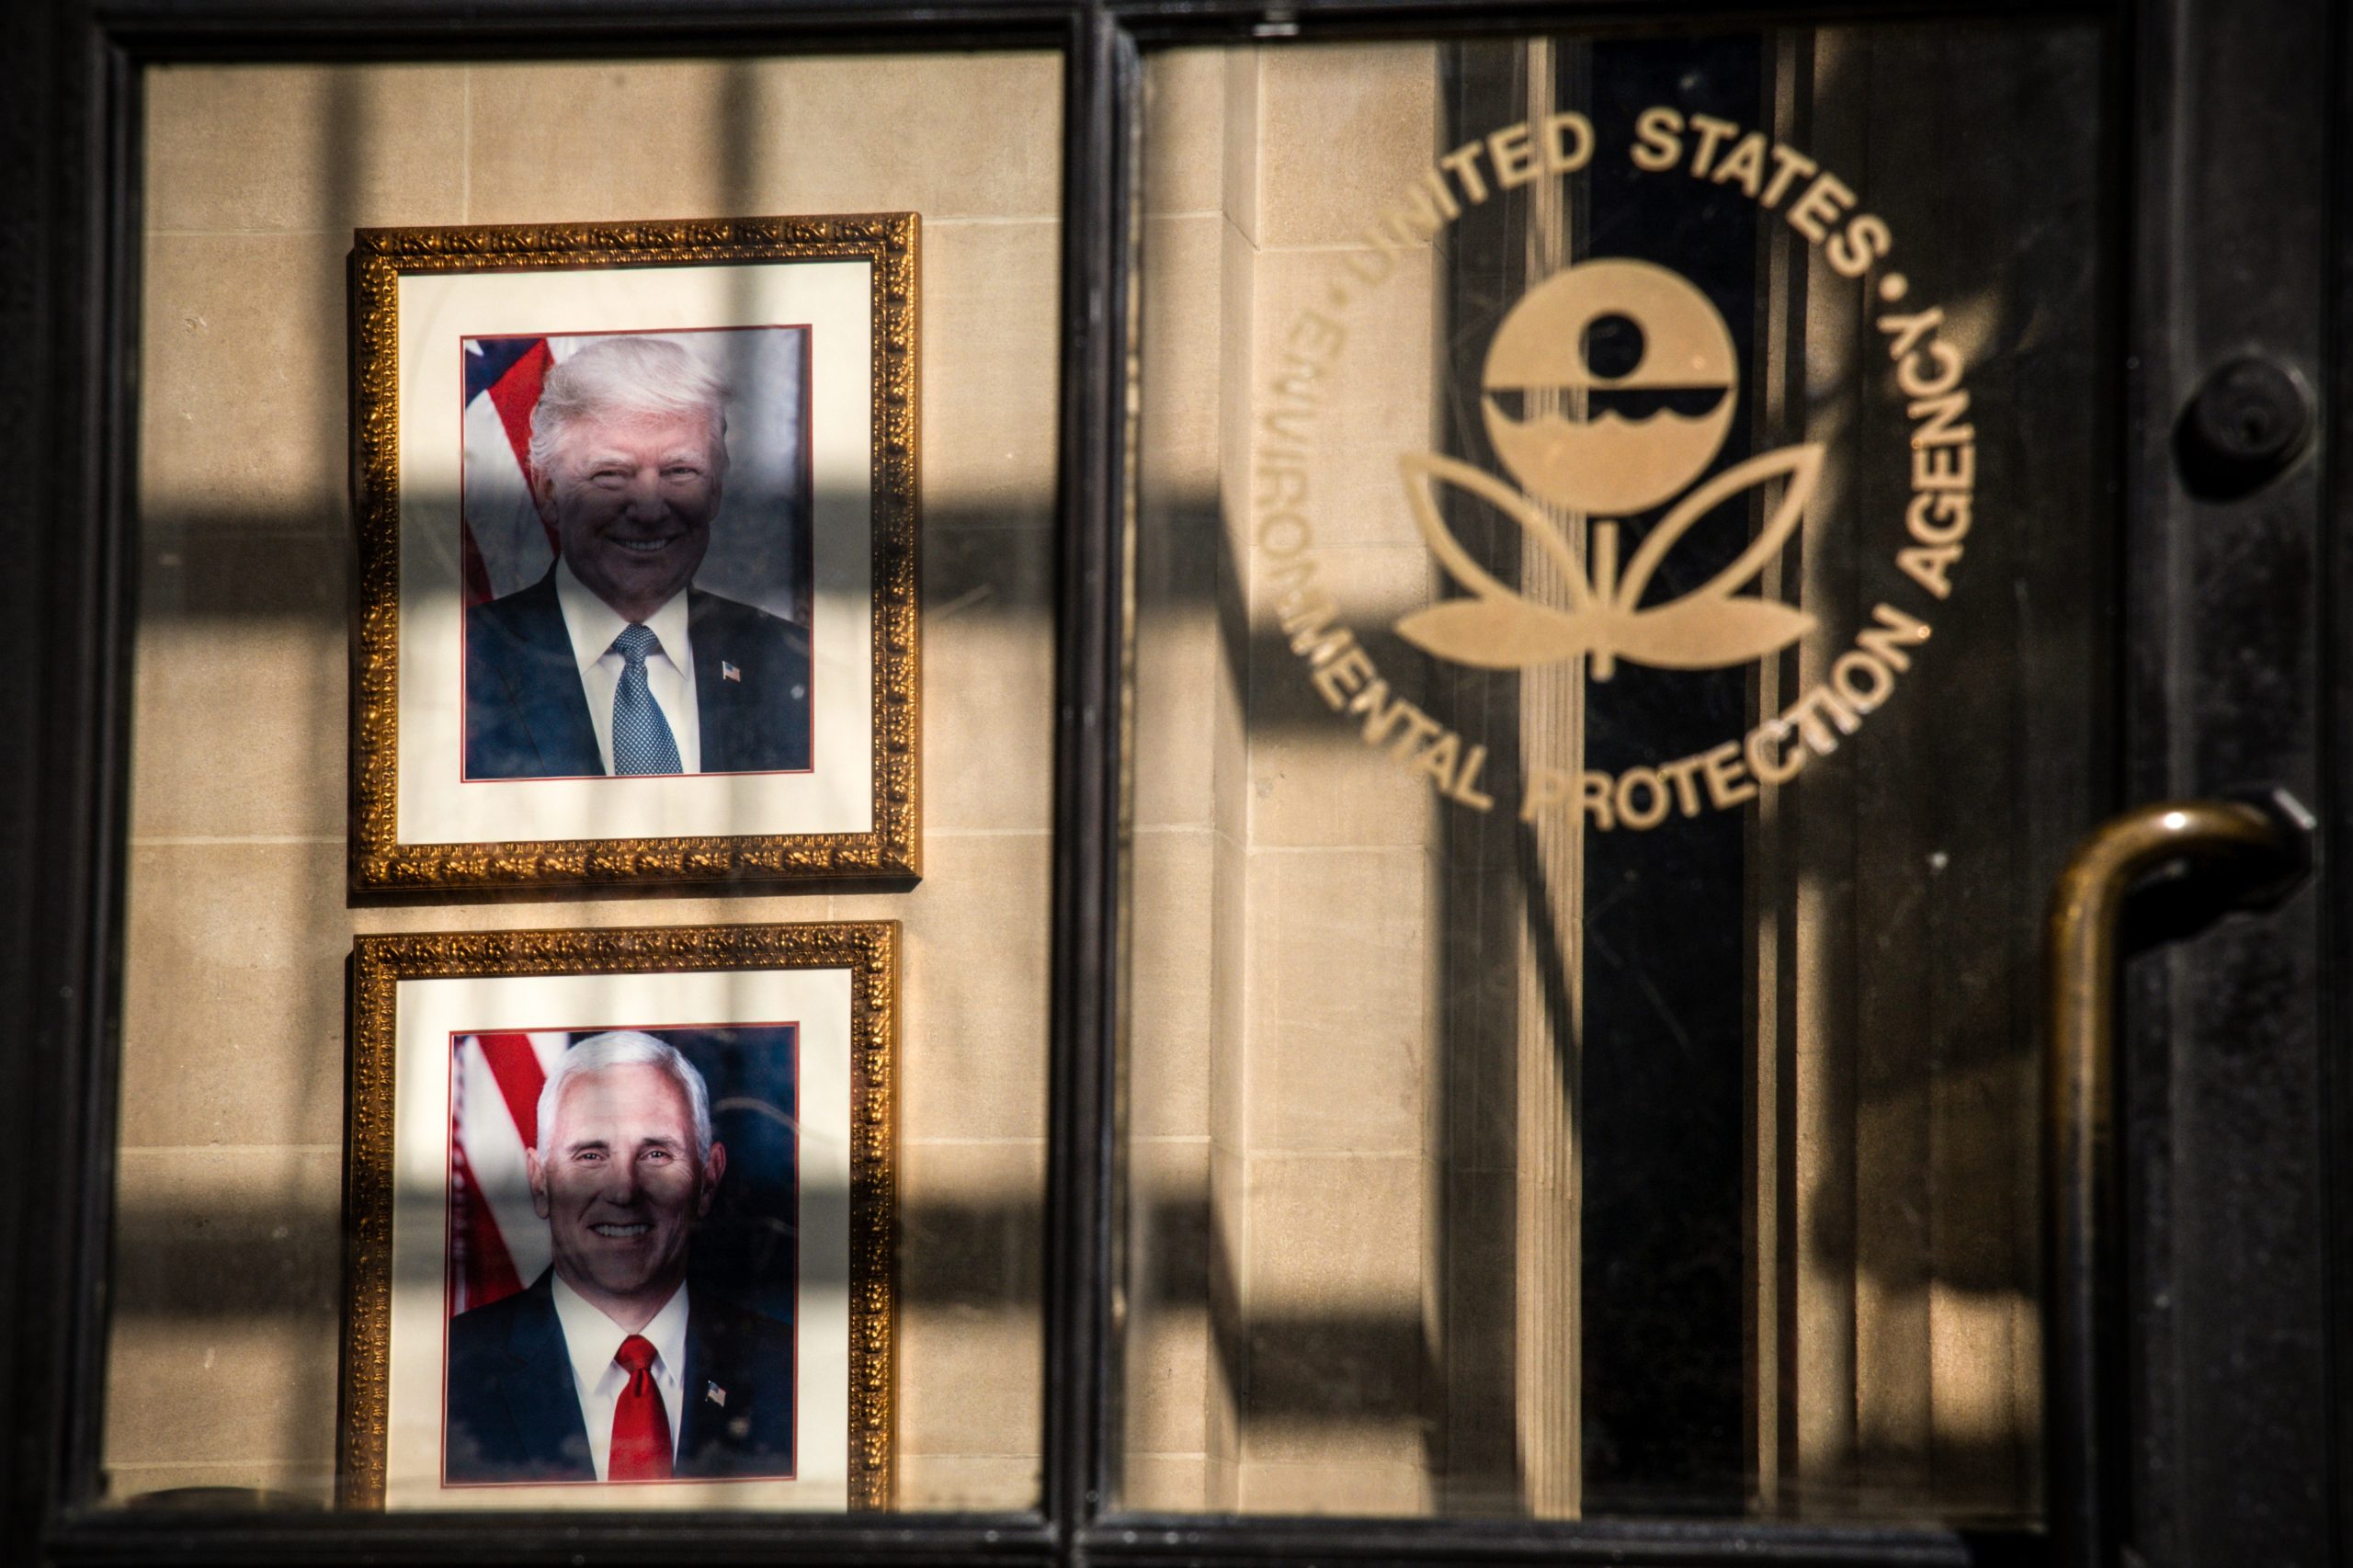 A detail view of the U.S. Environmental Protection Agency (EPA), with the portraits of President Donald Trump and Vice President Mike Pence hanging inside the doorway, in Washington, D.C., on November 20, 2020, amid the coronavirus pandemic. As confirmed COVID-19 case counts soar with the country experiencing exponential growth, President Donald Trump continues to deny the Biden Transition team access to government funding and data. (Graeme Sloan/Sipa USA)(Sipa via AP Images)